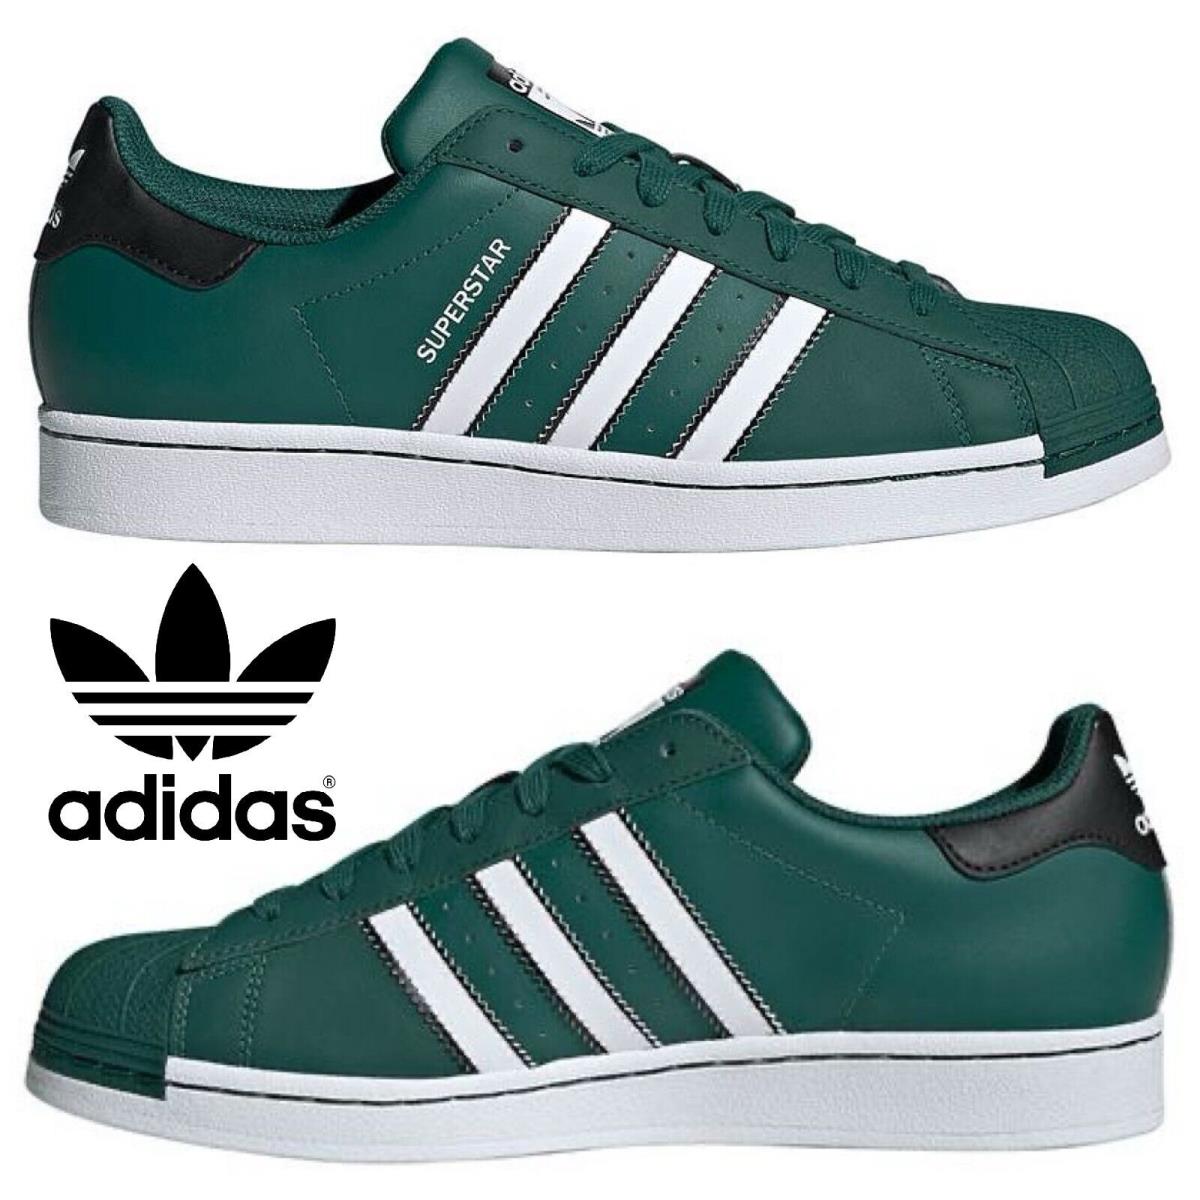 Adidas Originals Superstar Men`s Sneakers Comfort Sport Casual Shoes White Green - Green, Manufacturer: White/Particle Grey/Rose/Black